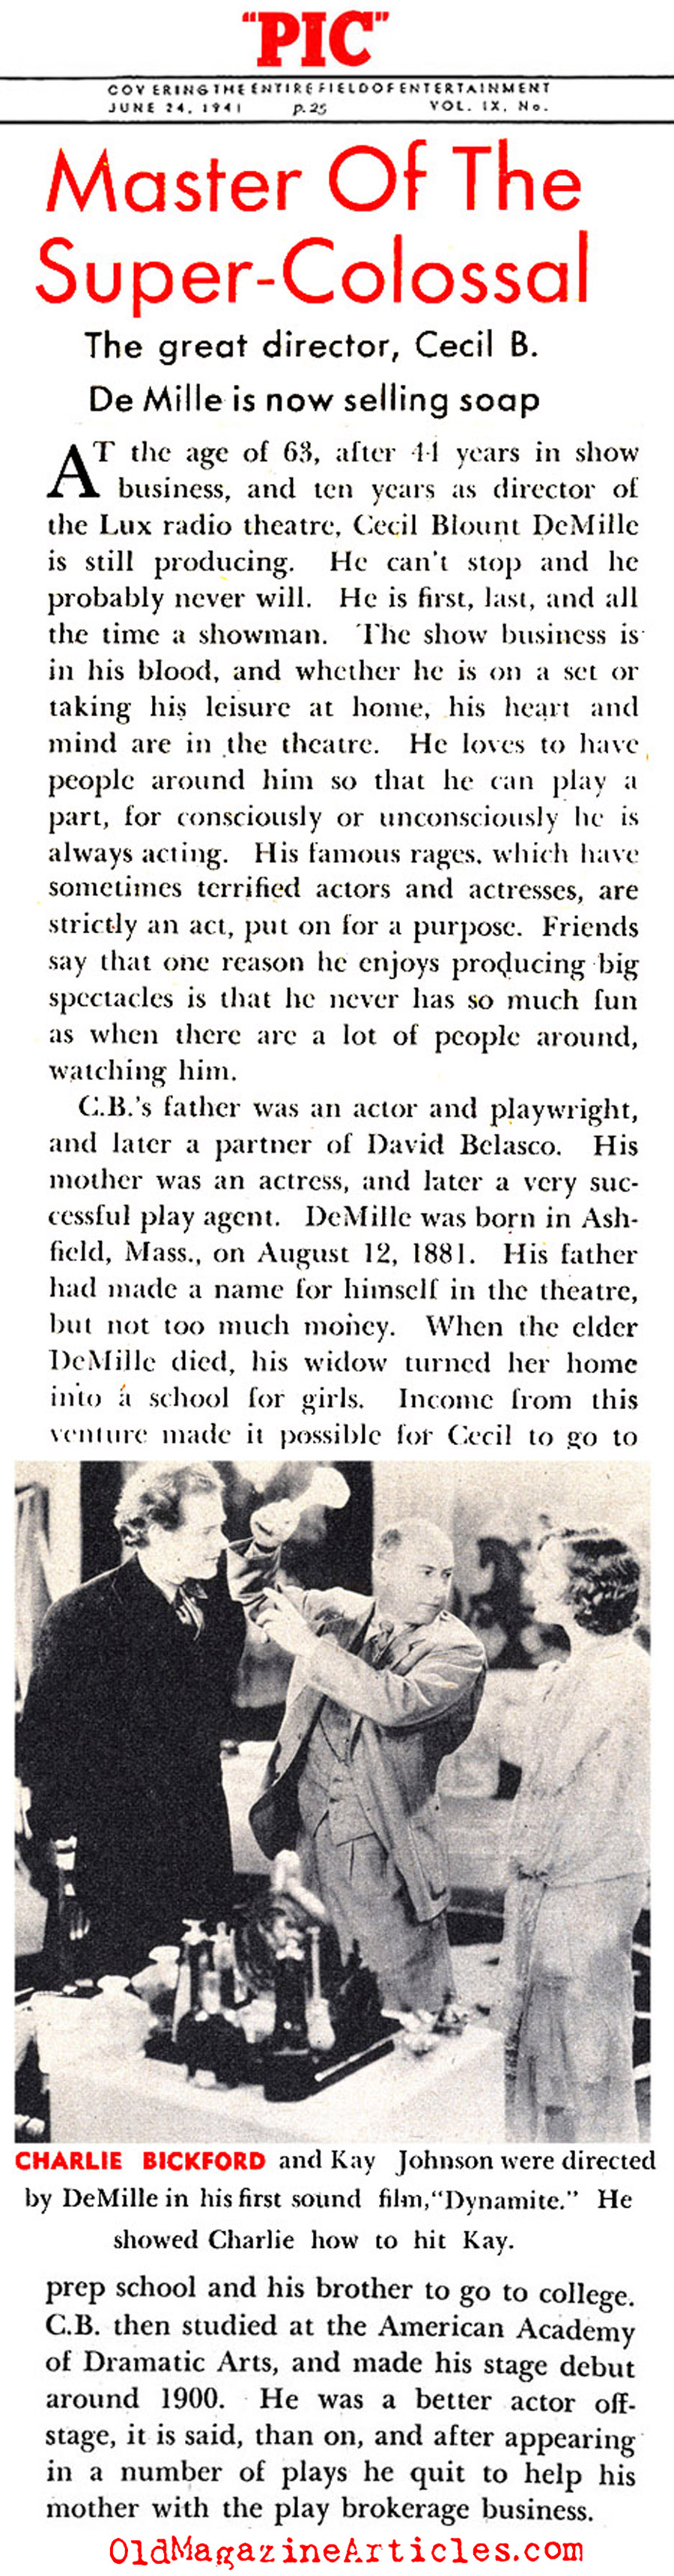 The  Show-Biz Blood of Cecil B. DeMille (Pic Magazine, 1941)